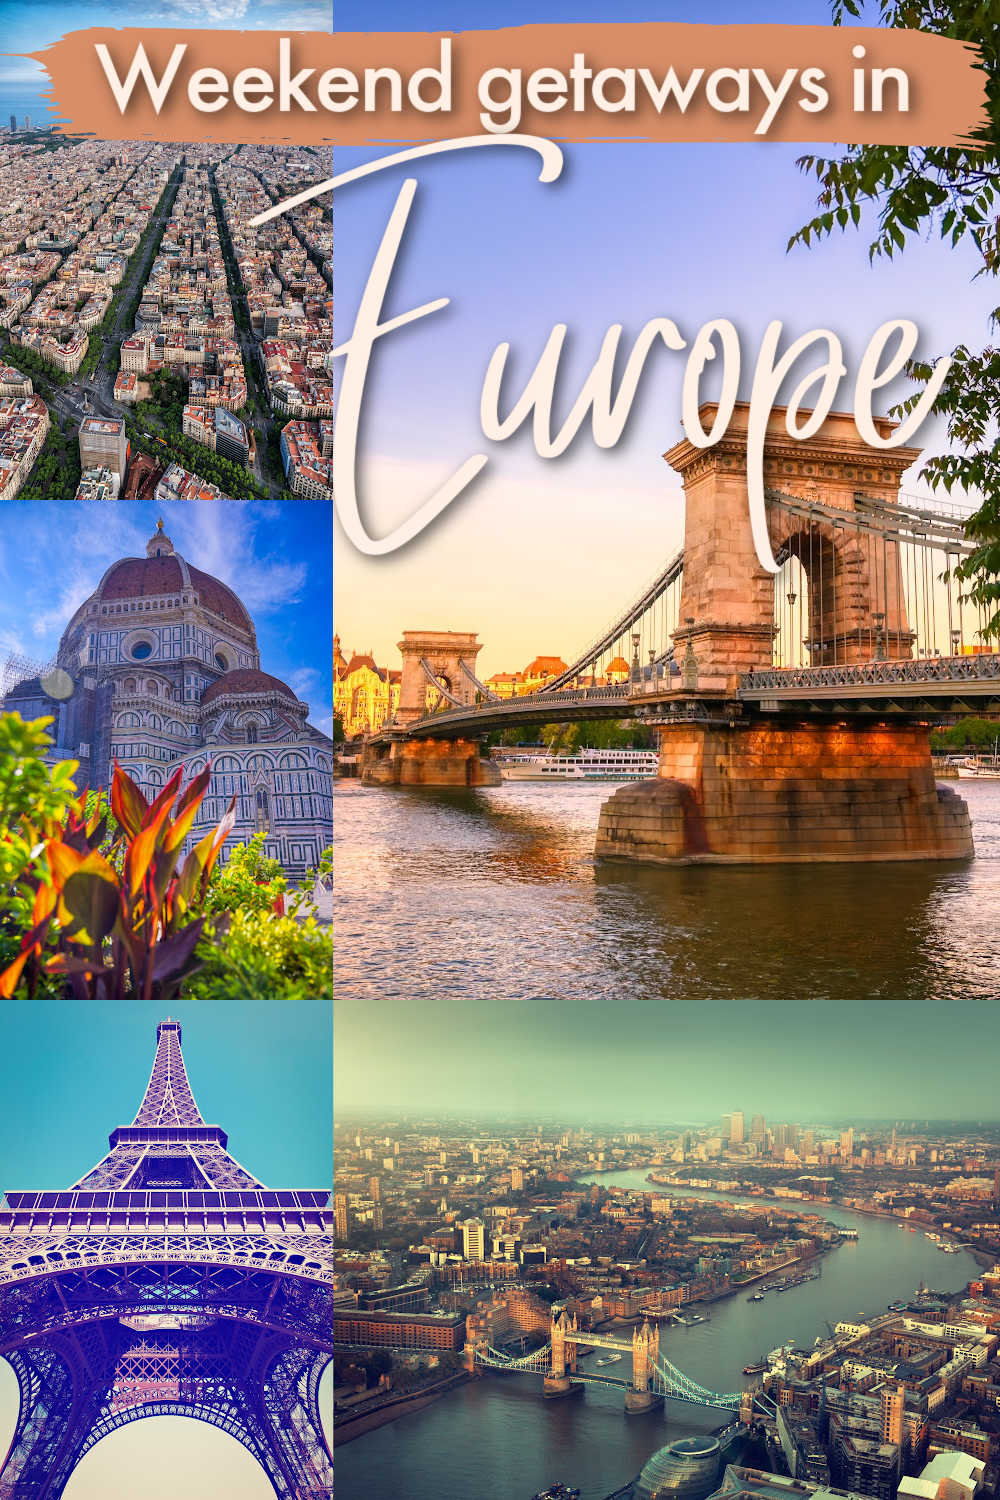 Here is a list of the best weekend getaways ideas for those who love Europe. We have everything covered from culture, food, architecture, nature, and fun, and you’re going to love these Europe city breaks. We share our favorite destinations for a weekend trip in Europe and practical tips to explore each of the incredible places. 